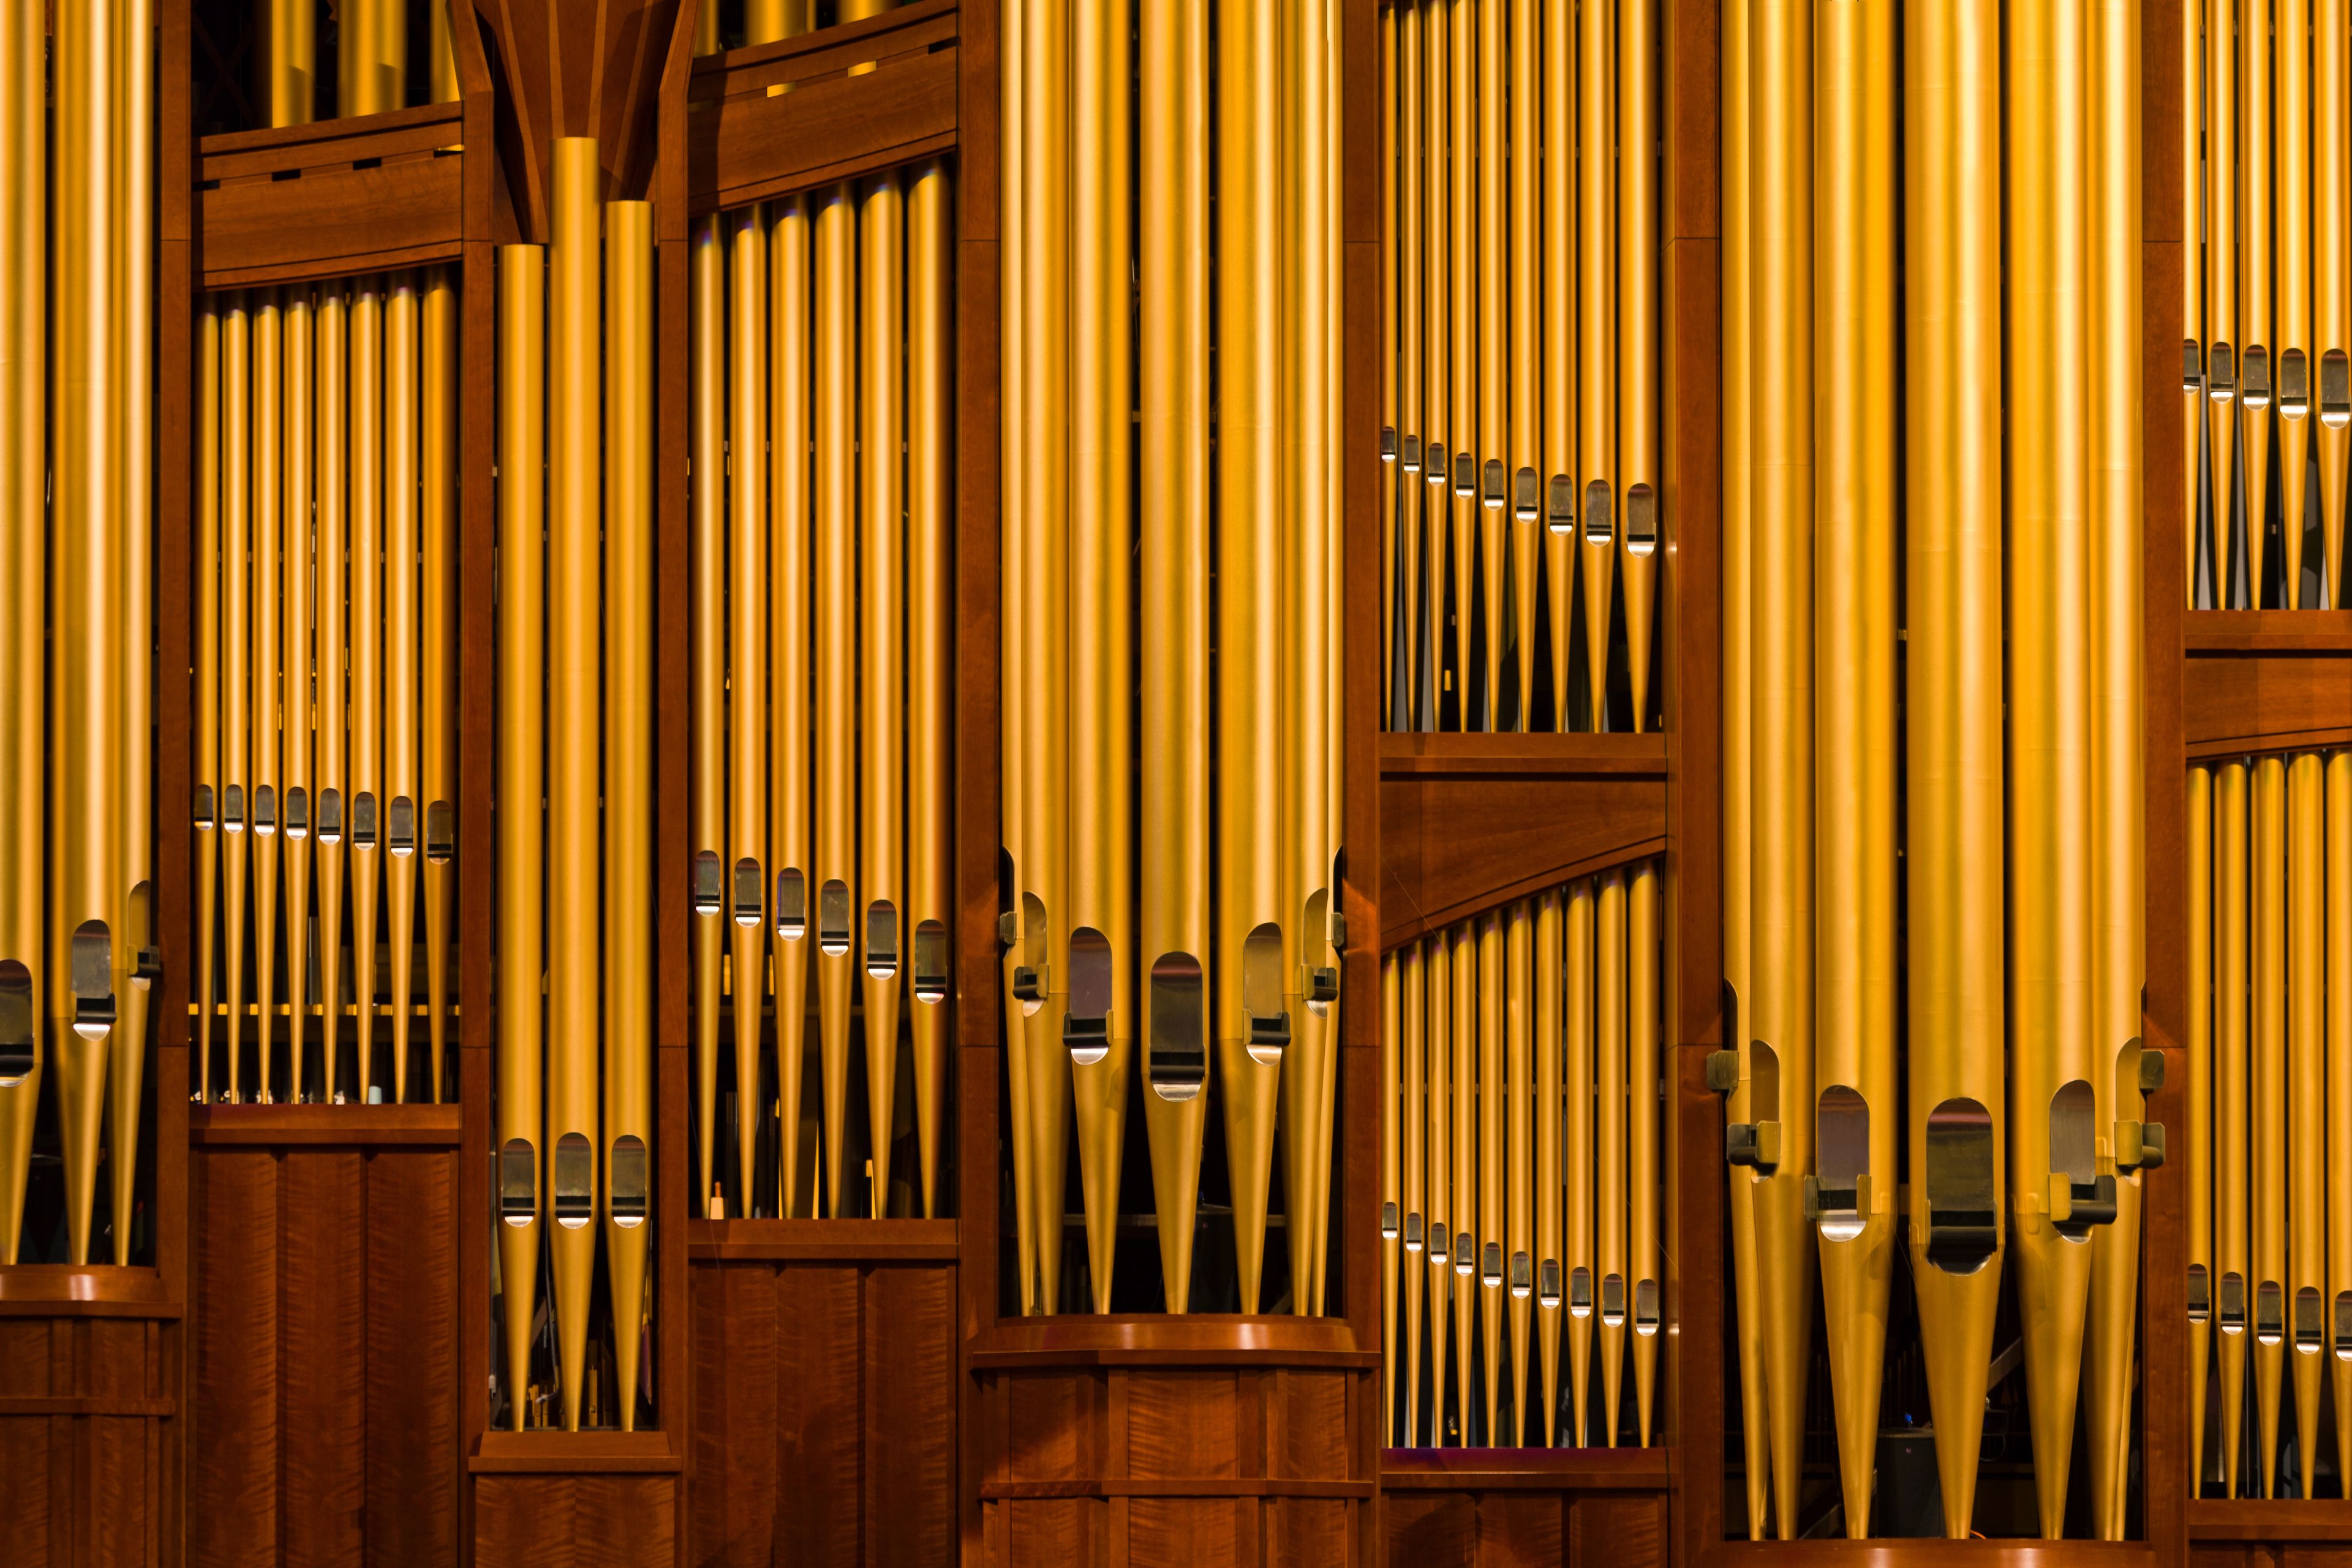 Tall organ pipes inside the Conference Center.